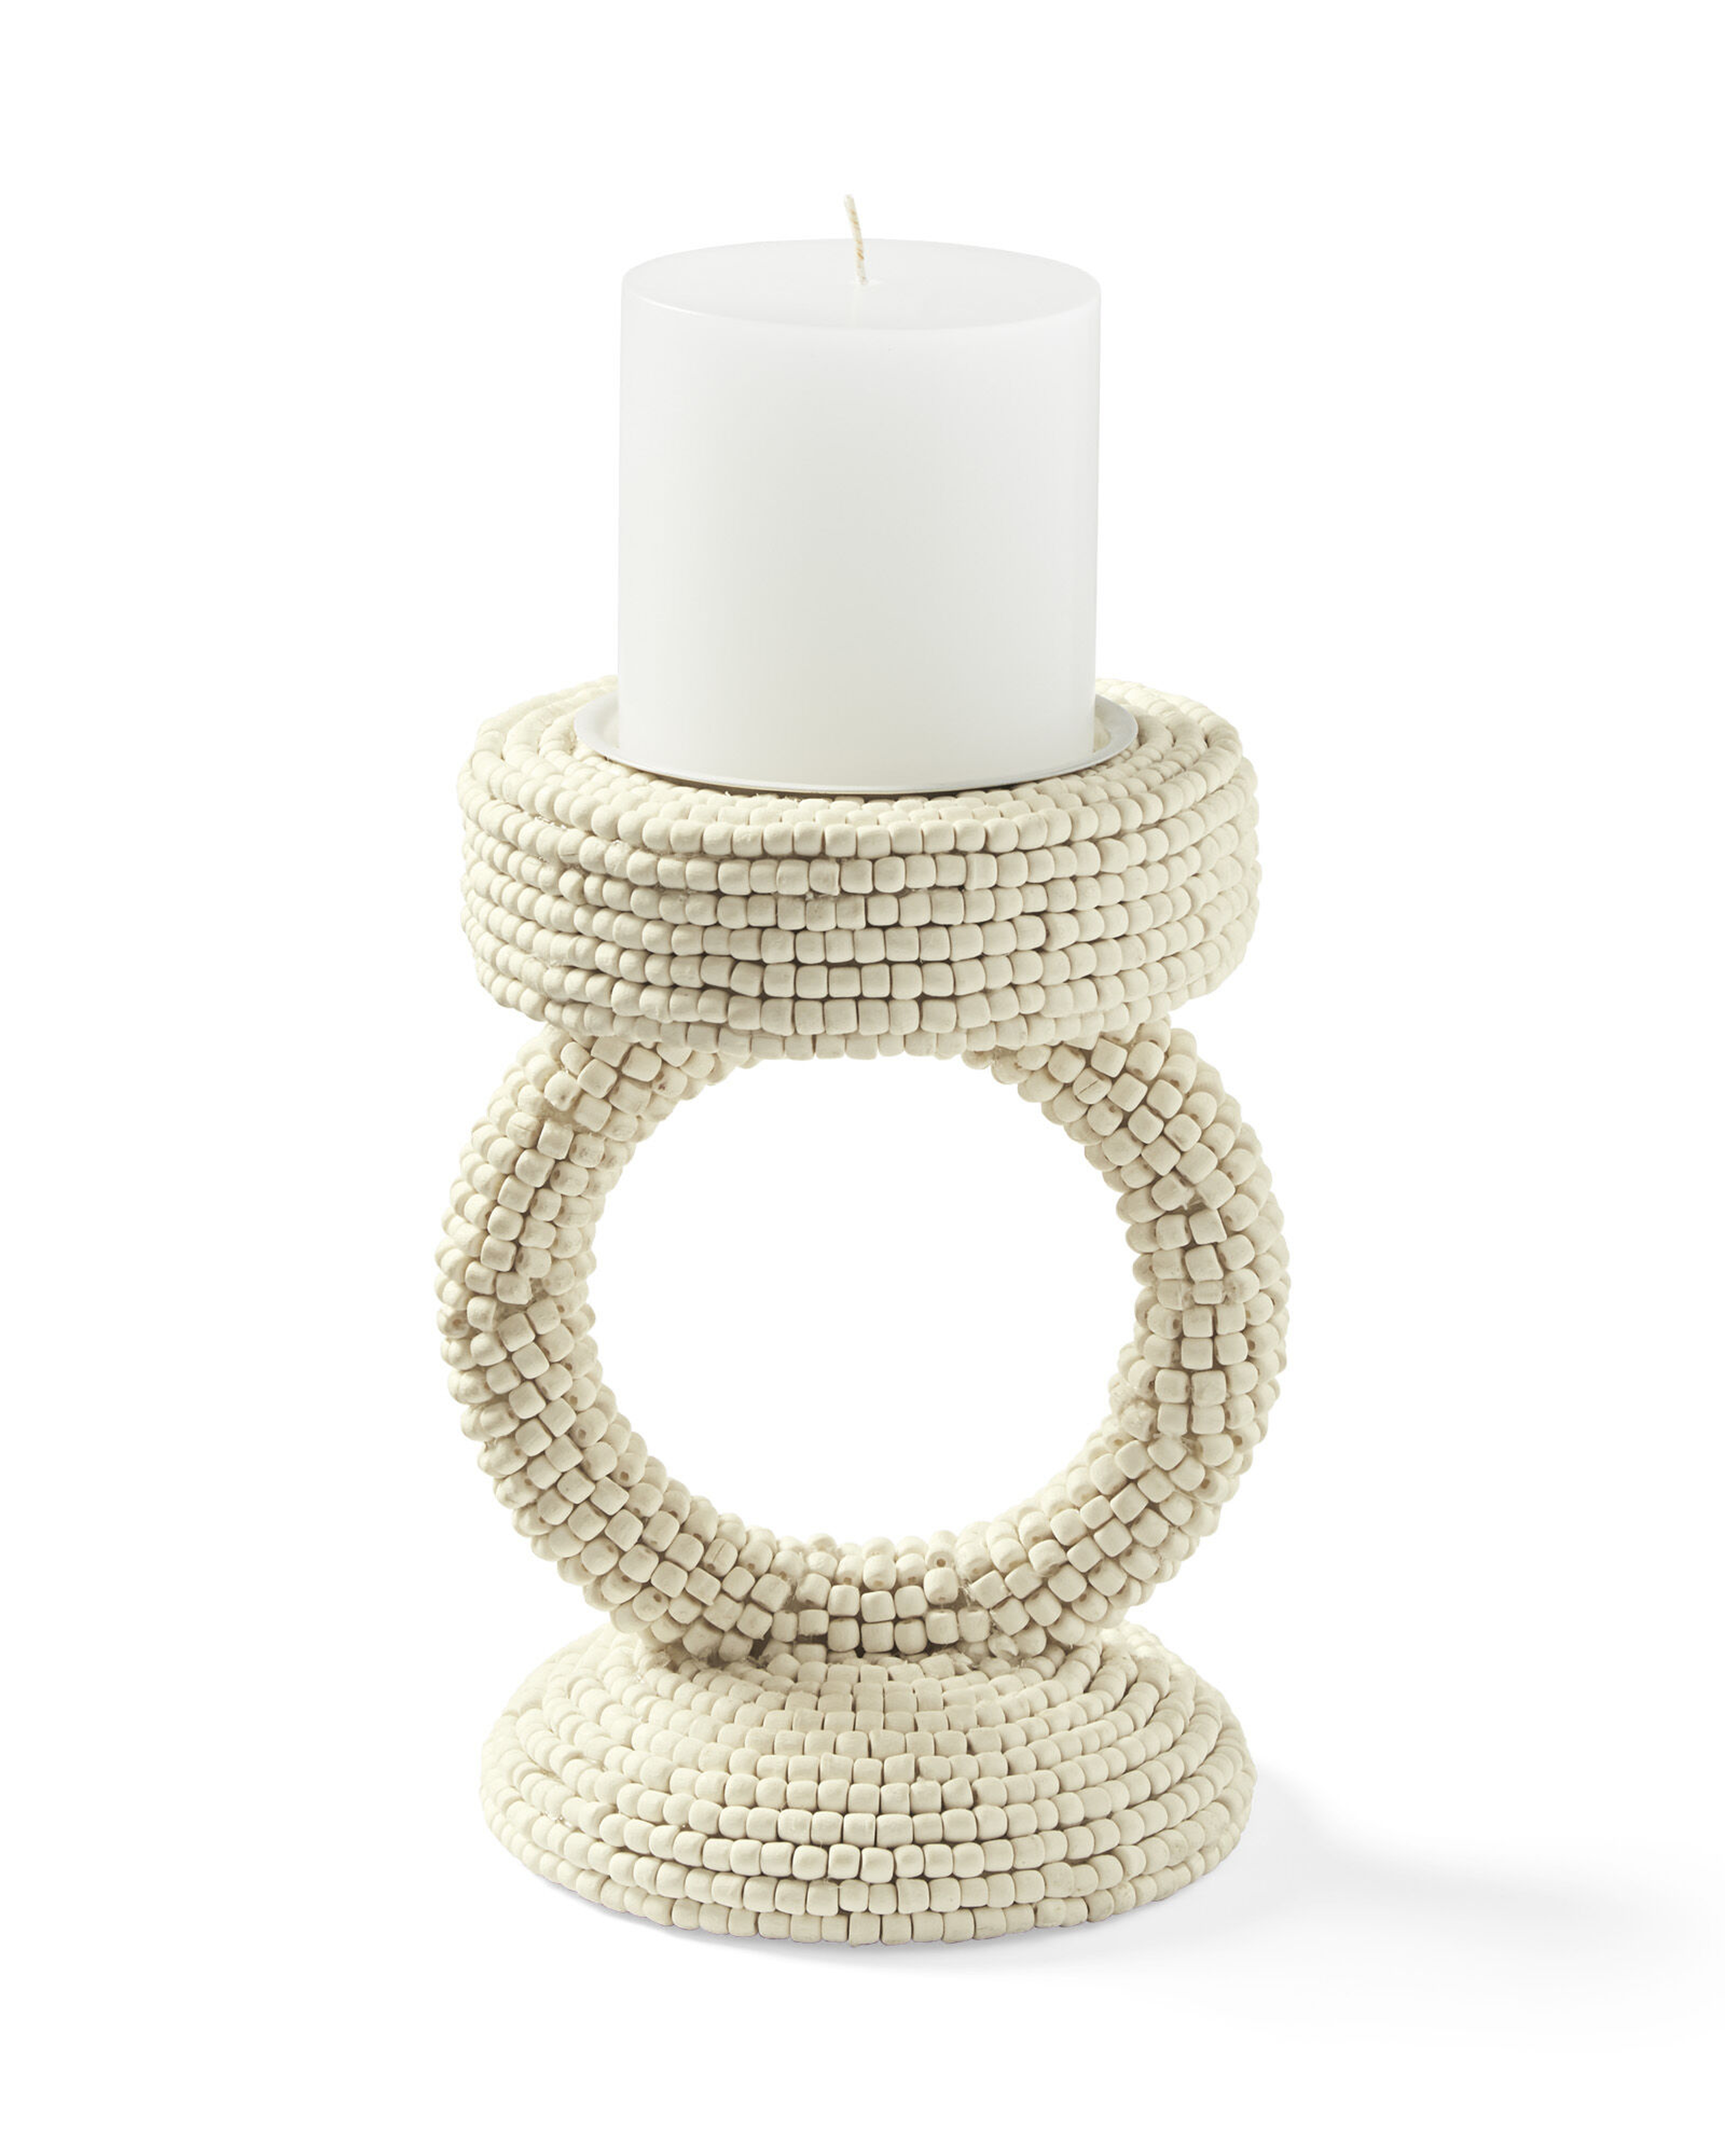 Del Sur Pillar Candle Holder - Serena and Lily